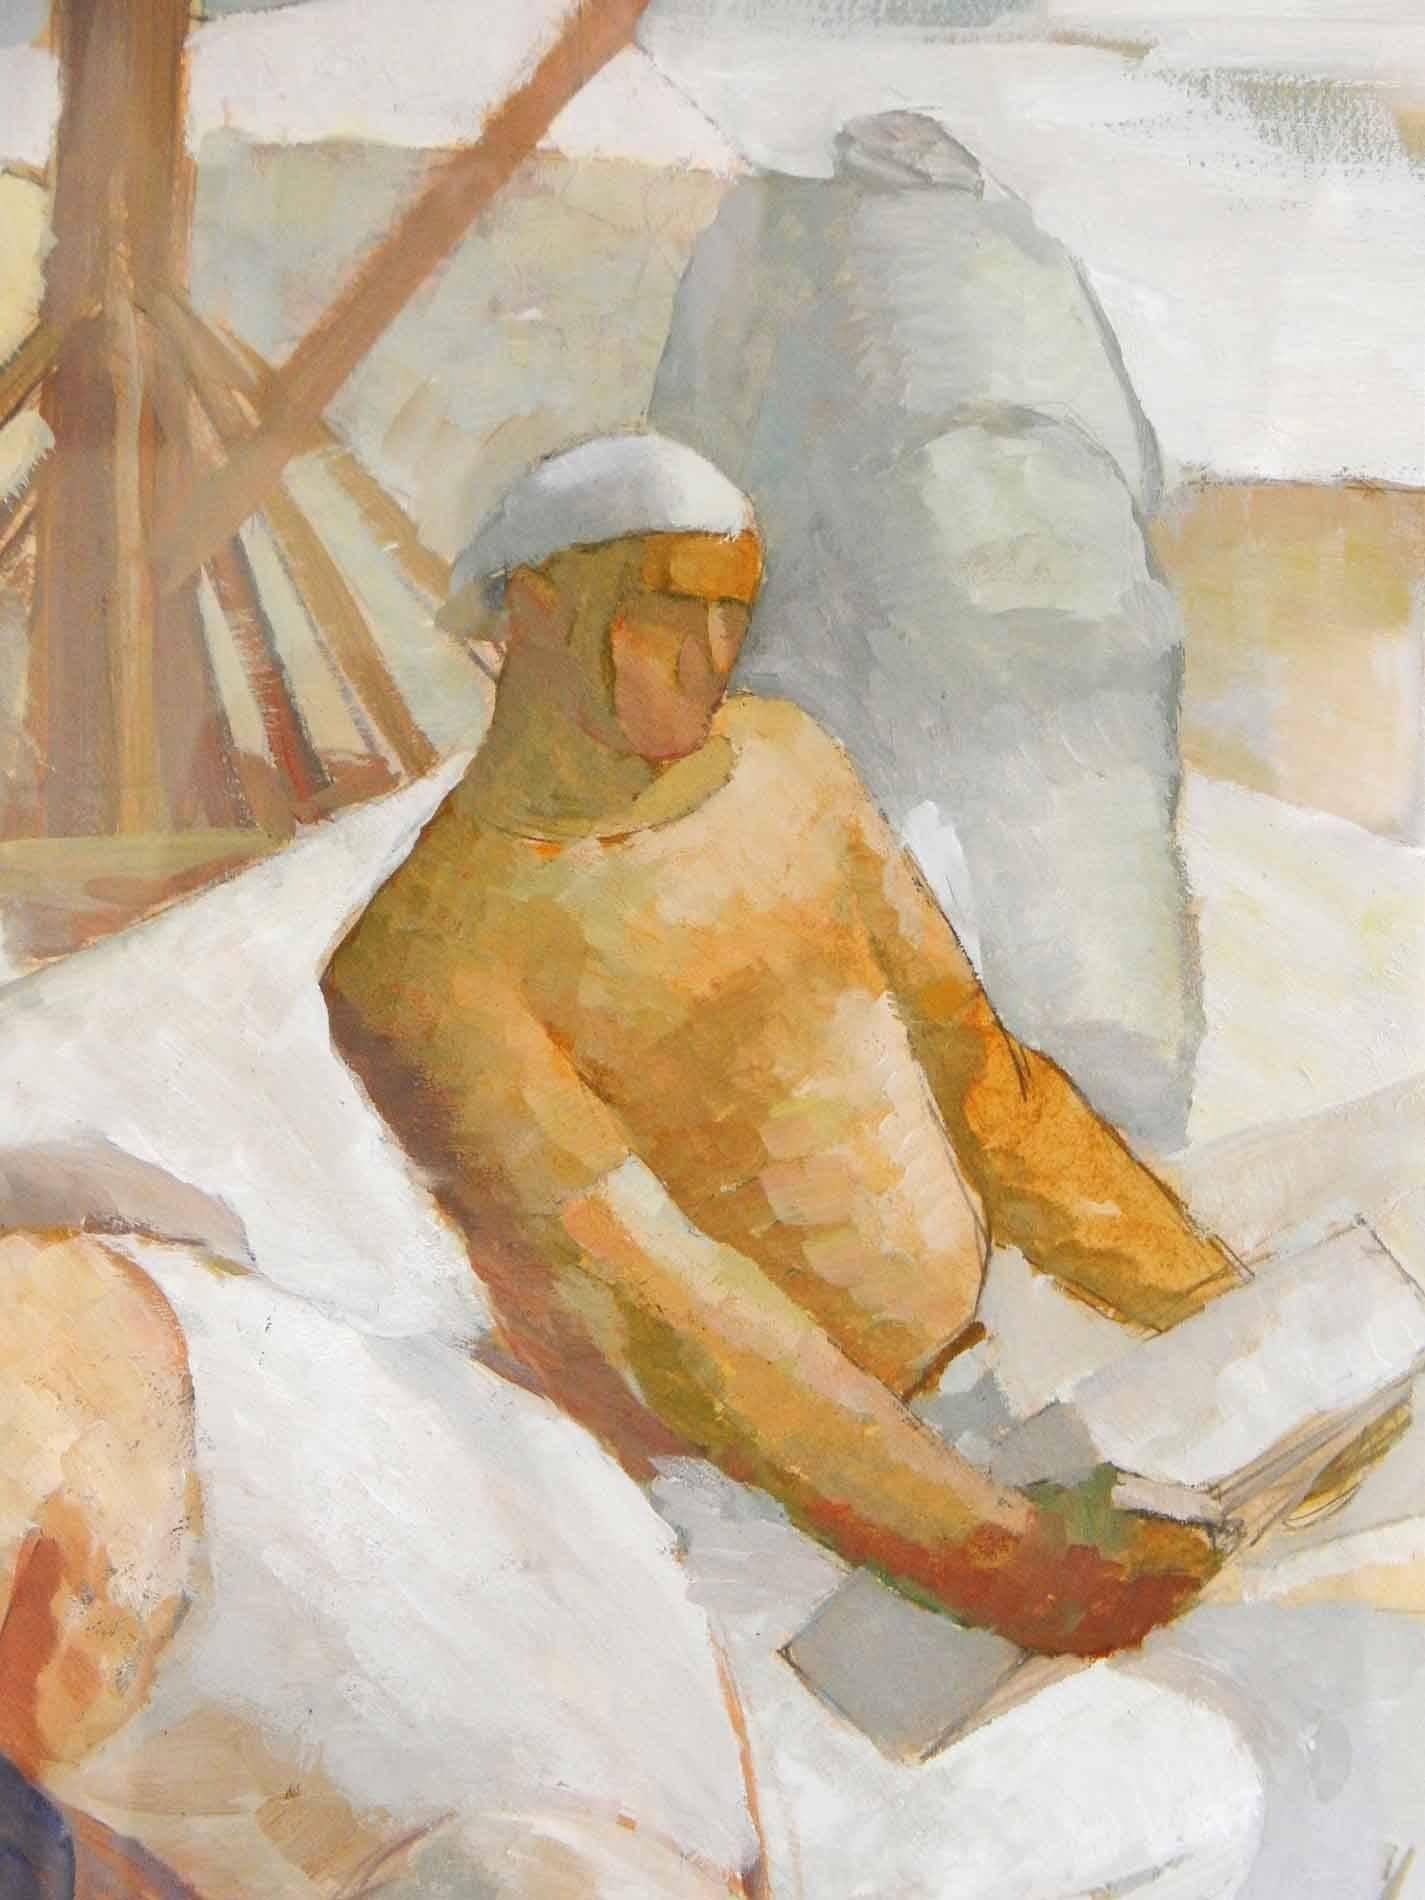 The painter Iver Rose is best known for his work which brought attention to the plight of workers in Depression Era America. This painting of quarry workers in Rockport, Massachusetts, is an especially fine example. Rose was fascinated with the